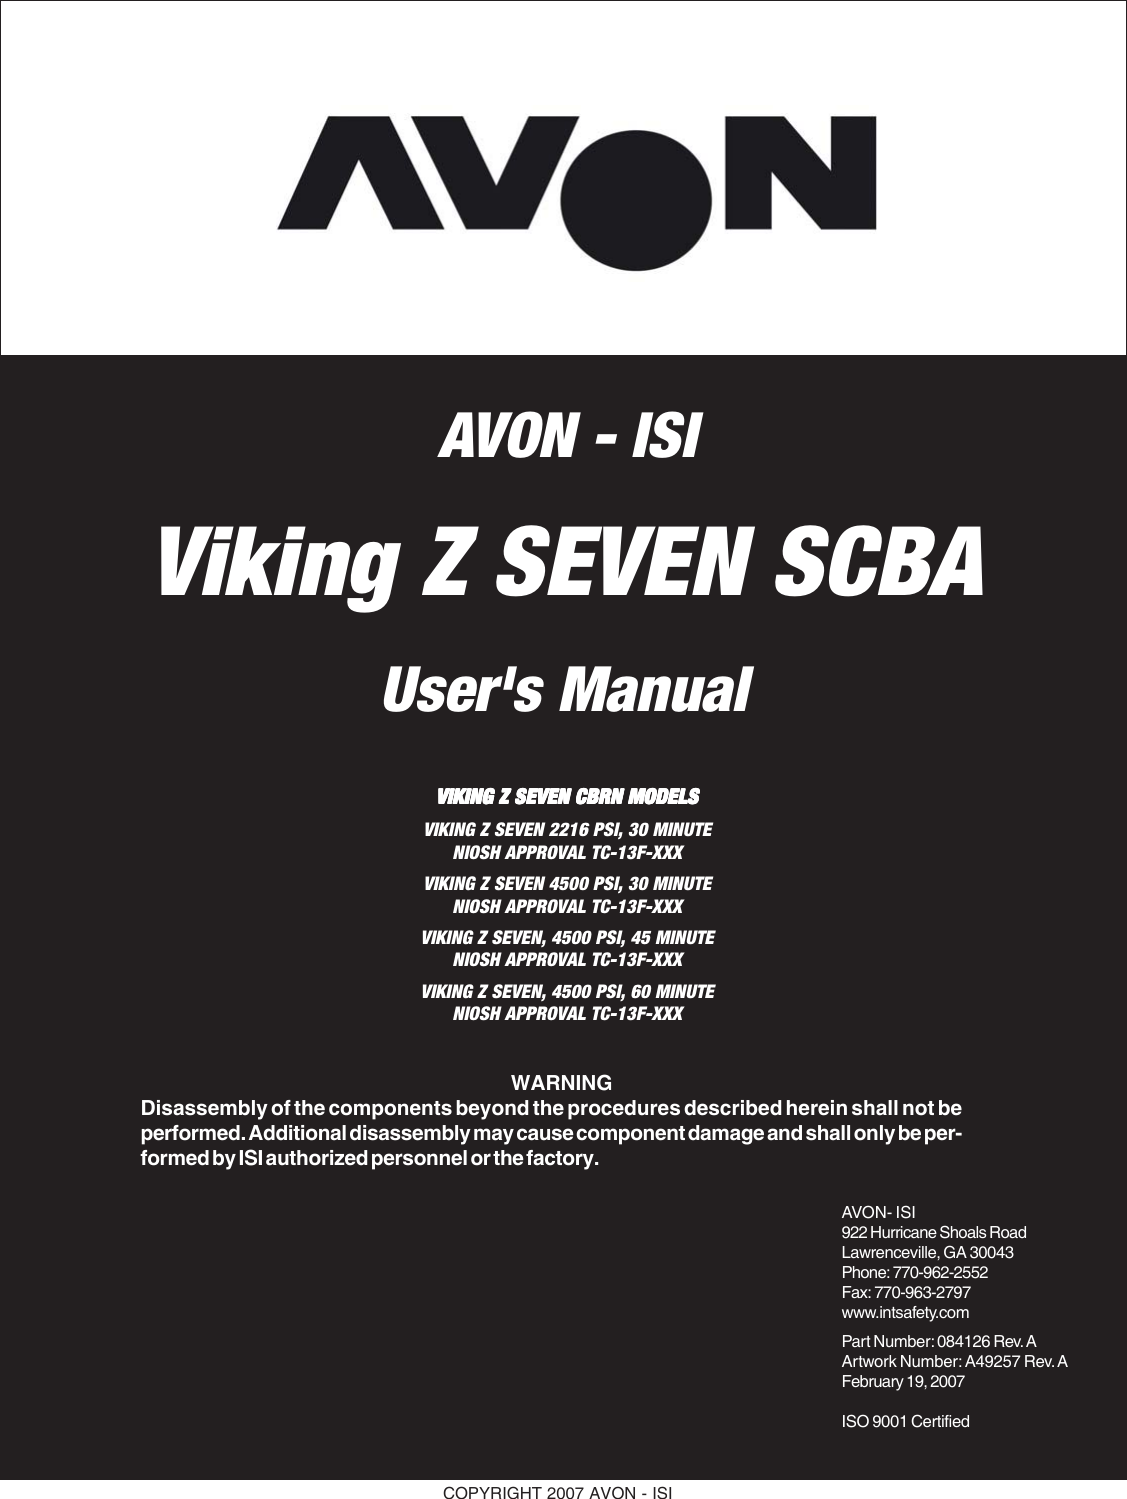 COPYRIGHT 2007 AVON - ISIViking Z SEVEN SCBAUser&apos;s ManualAVON- ISI922 Hurricane Shoals RoadLawrenceville, GA 30043Phone: 770-962-2552Fax: 770-963-2797www.intsafety.comPart Number: 084126 Rev. AArtwork Number: A49257 Rev. AFebruary 19, 2007ISO 9001 Certified  WARNINGDisassembly of the components beyond the procedures described herein shall not beperformed. Additional disassembly may cause component damage and shall only be per-formed by ISI authorized personnel or the factory.VIKING Z SEVEN CBRN MODELSVIKING Z SEVEN CBRN MODELSVIKING Z SEVEN CBRN MODELSVIKING Z SEVEN CBRN MODELSVIKING Z SEVEN CBRN MODELSVIKING Z SEVEN 2216 PSI, 30 MINUTENIOSH APPROVAL TC-13F-XXXVIKING Z SEVEN 4500 PSI, 30 MINUTENIOSH APPROVAL TC-13F-XXXVIKING Z SEVEN, 4500 PSI, 45 MINUTENIOSH APPROVAL TC-13F-XXXVIKING Z SEVEN, 4500 PSI, 60 MINUTENIOSH APPROVAL TC-13F-XXXAVON - ISI